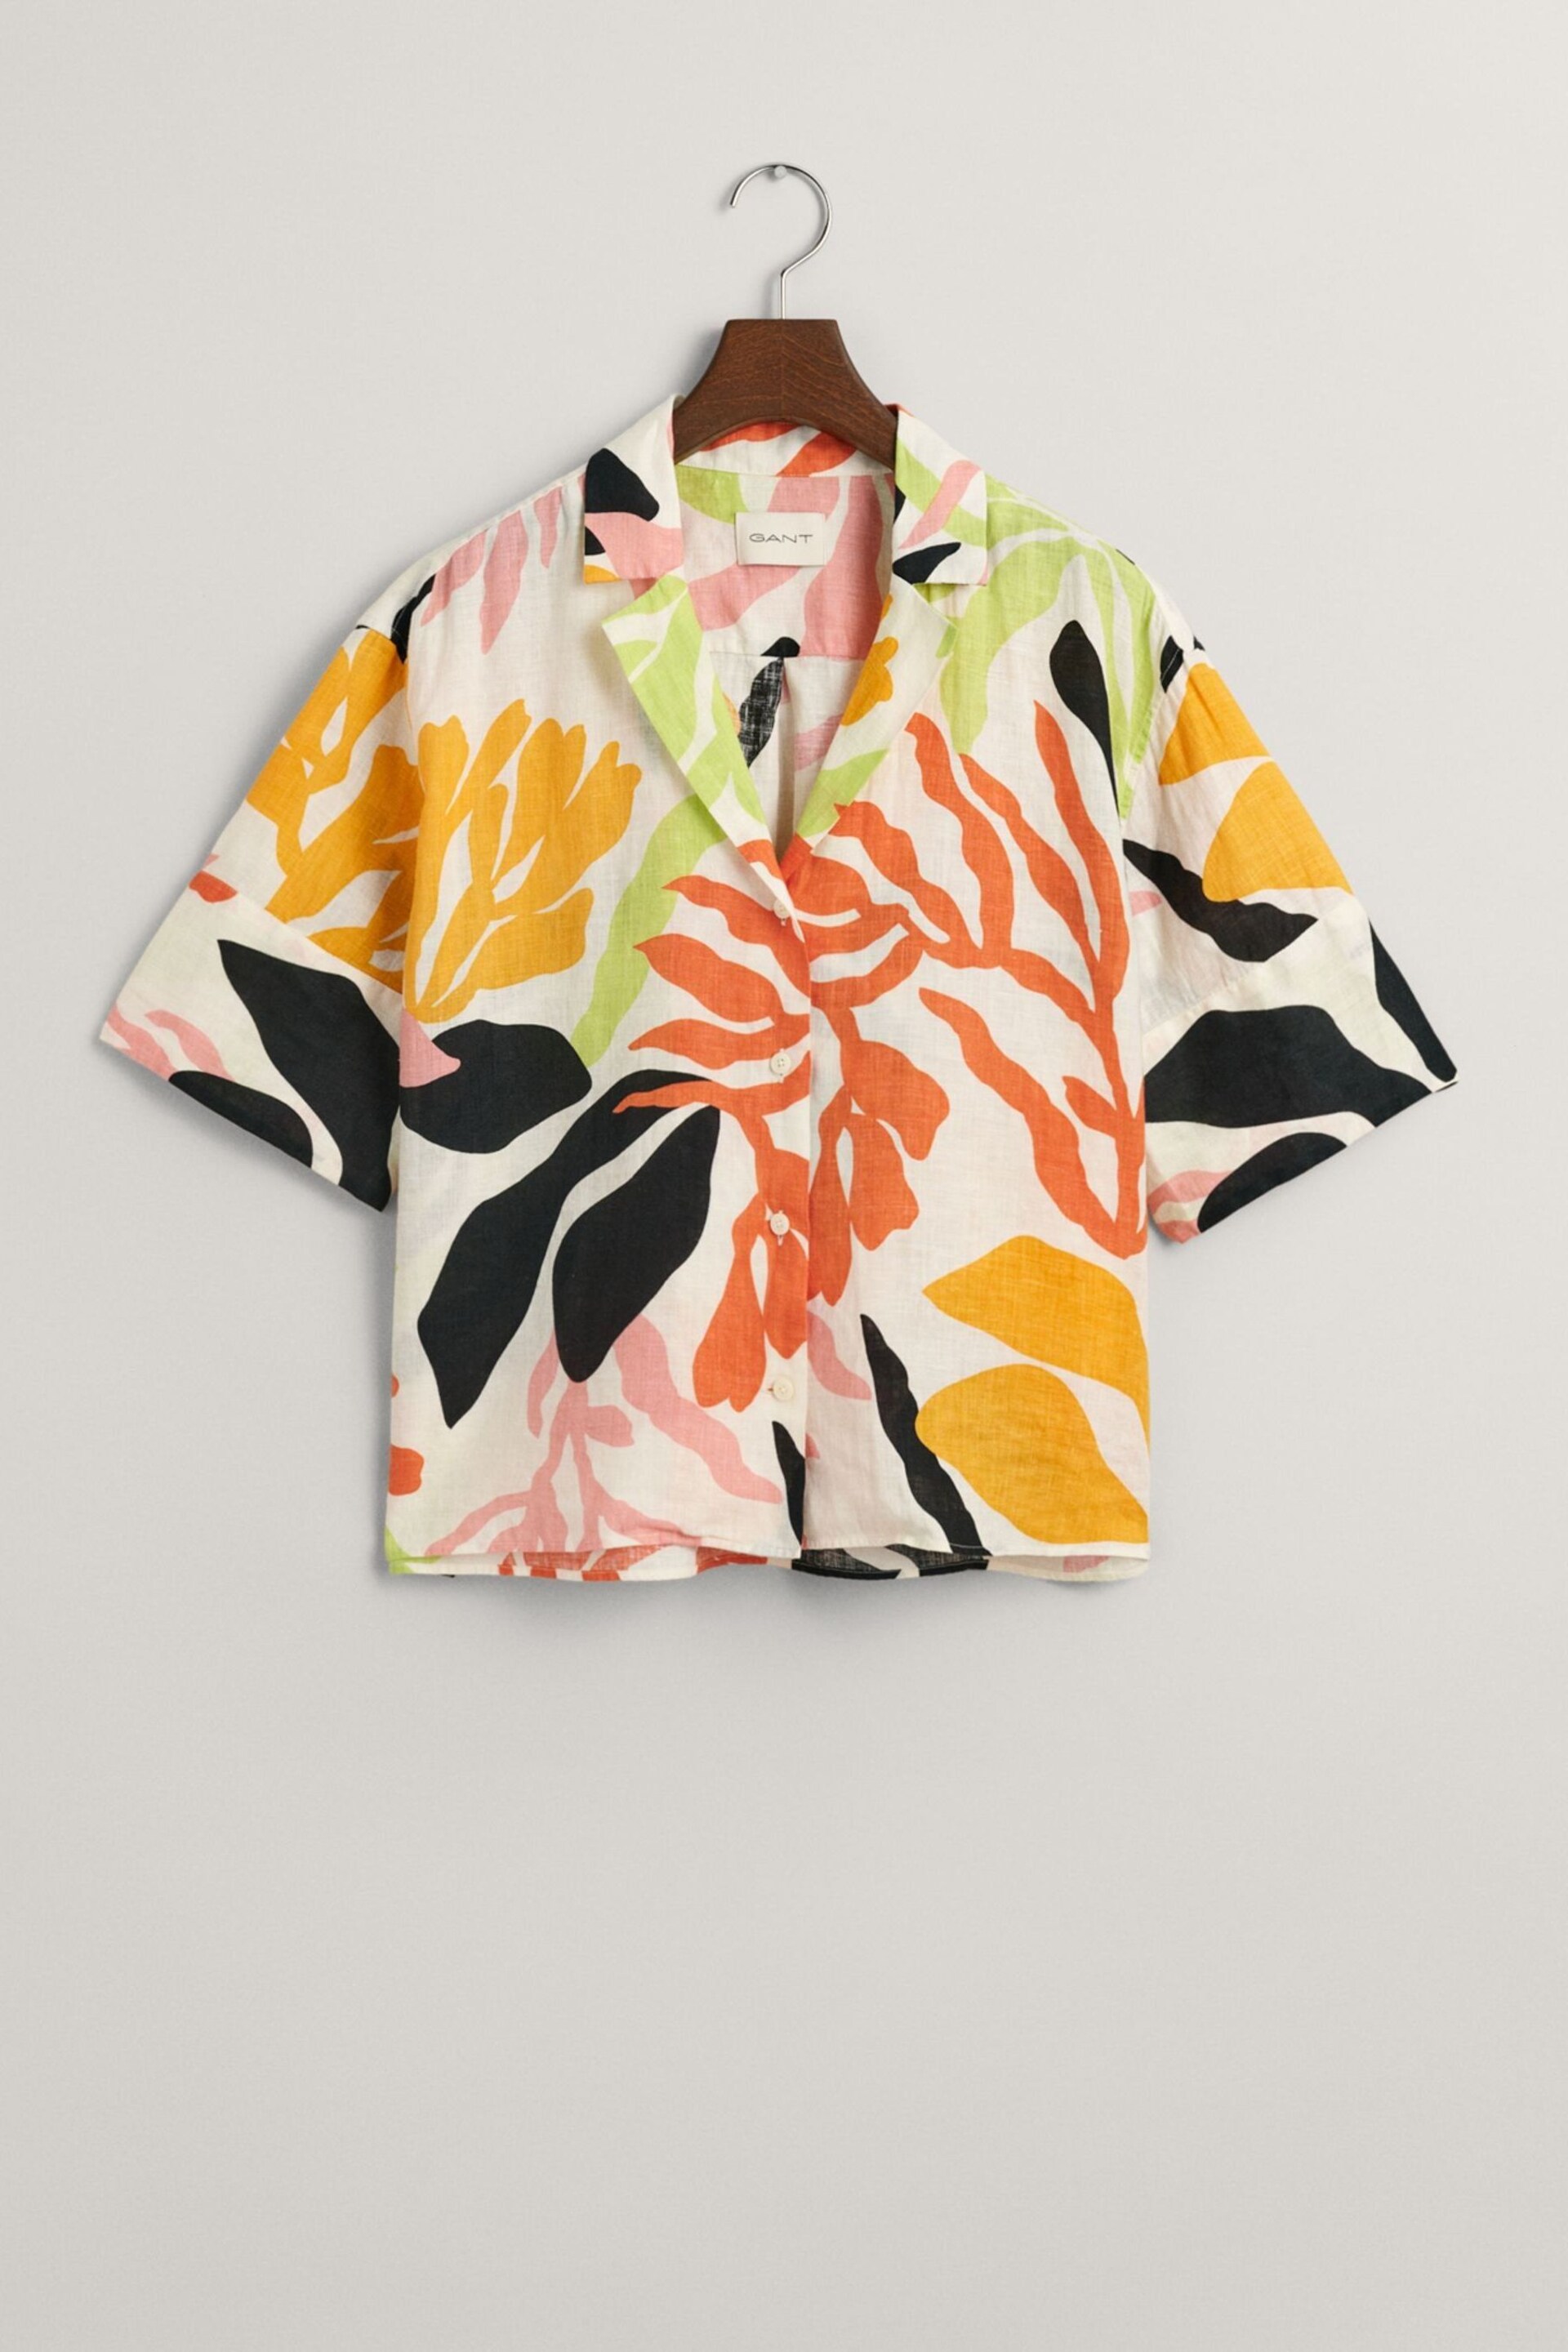 GANT Yellow Relaxed Fit Palm Print Linen Short Sleeve Shirt - Image 7 of 7